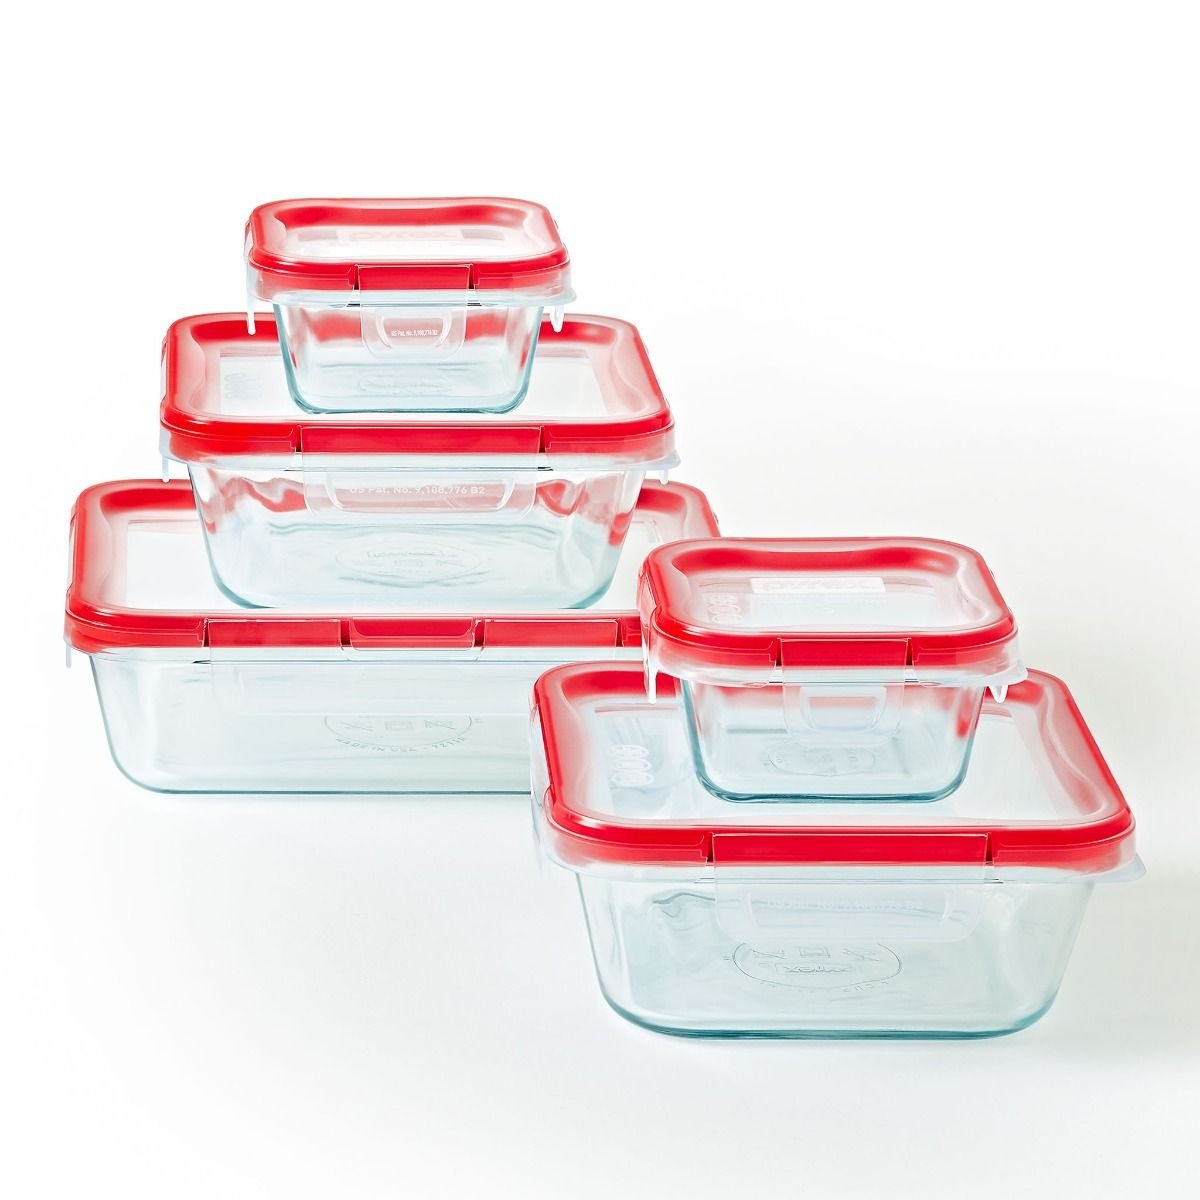 Pyrex® Covered Glass Storage Set, 10 pc - Baker's